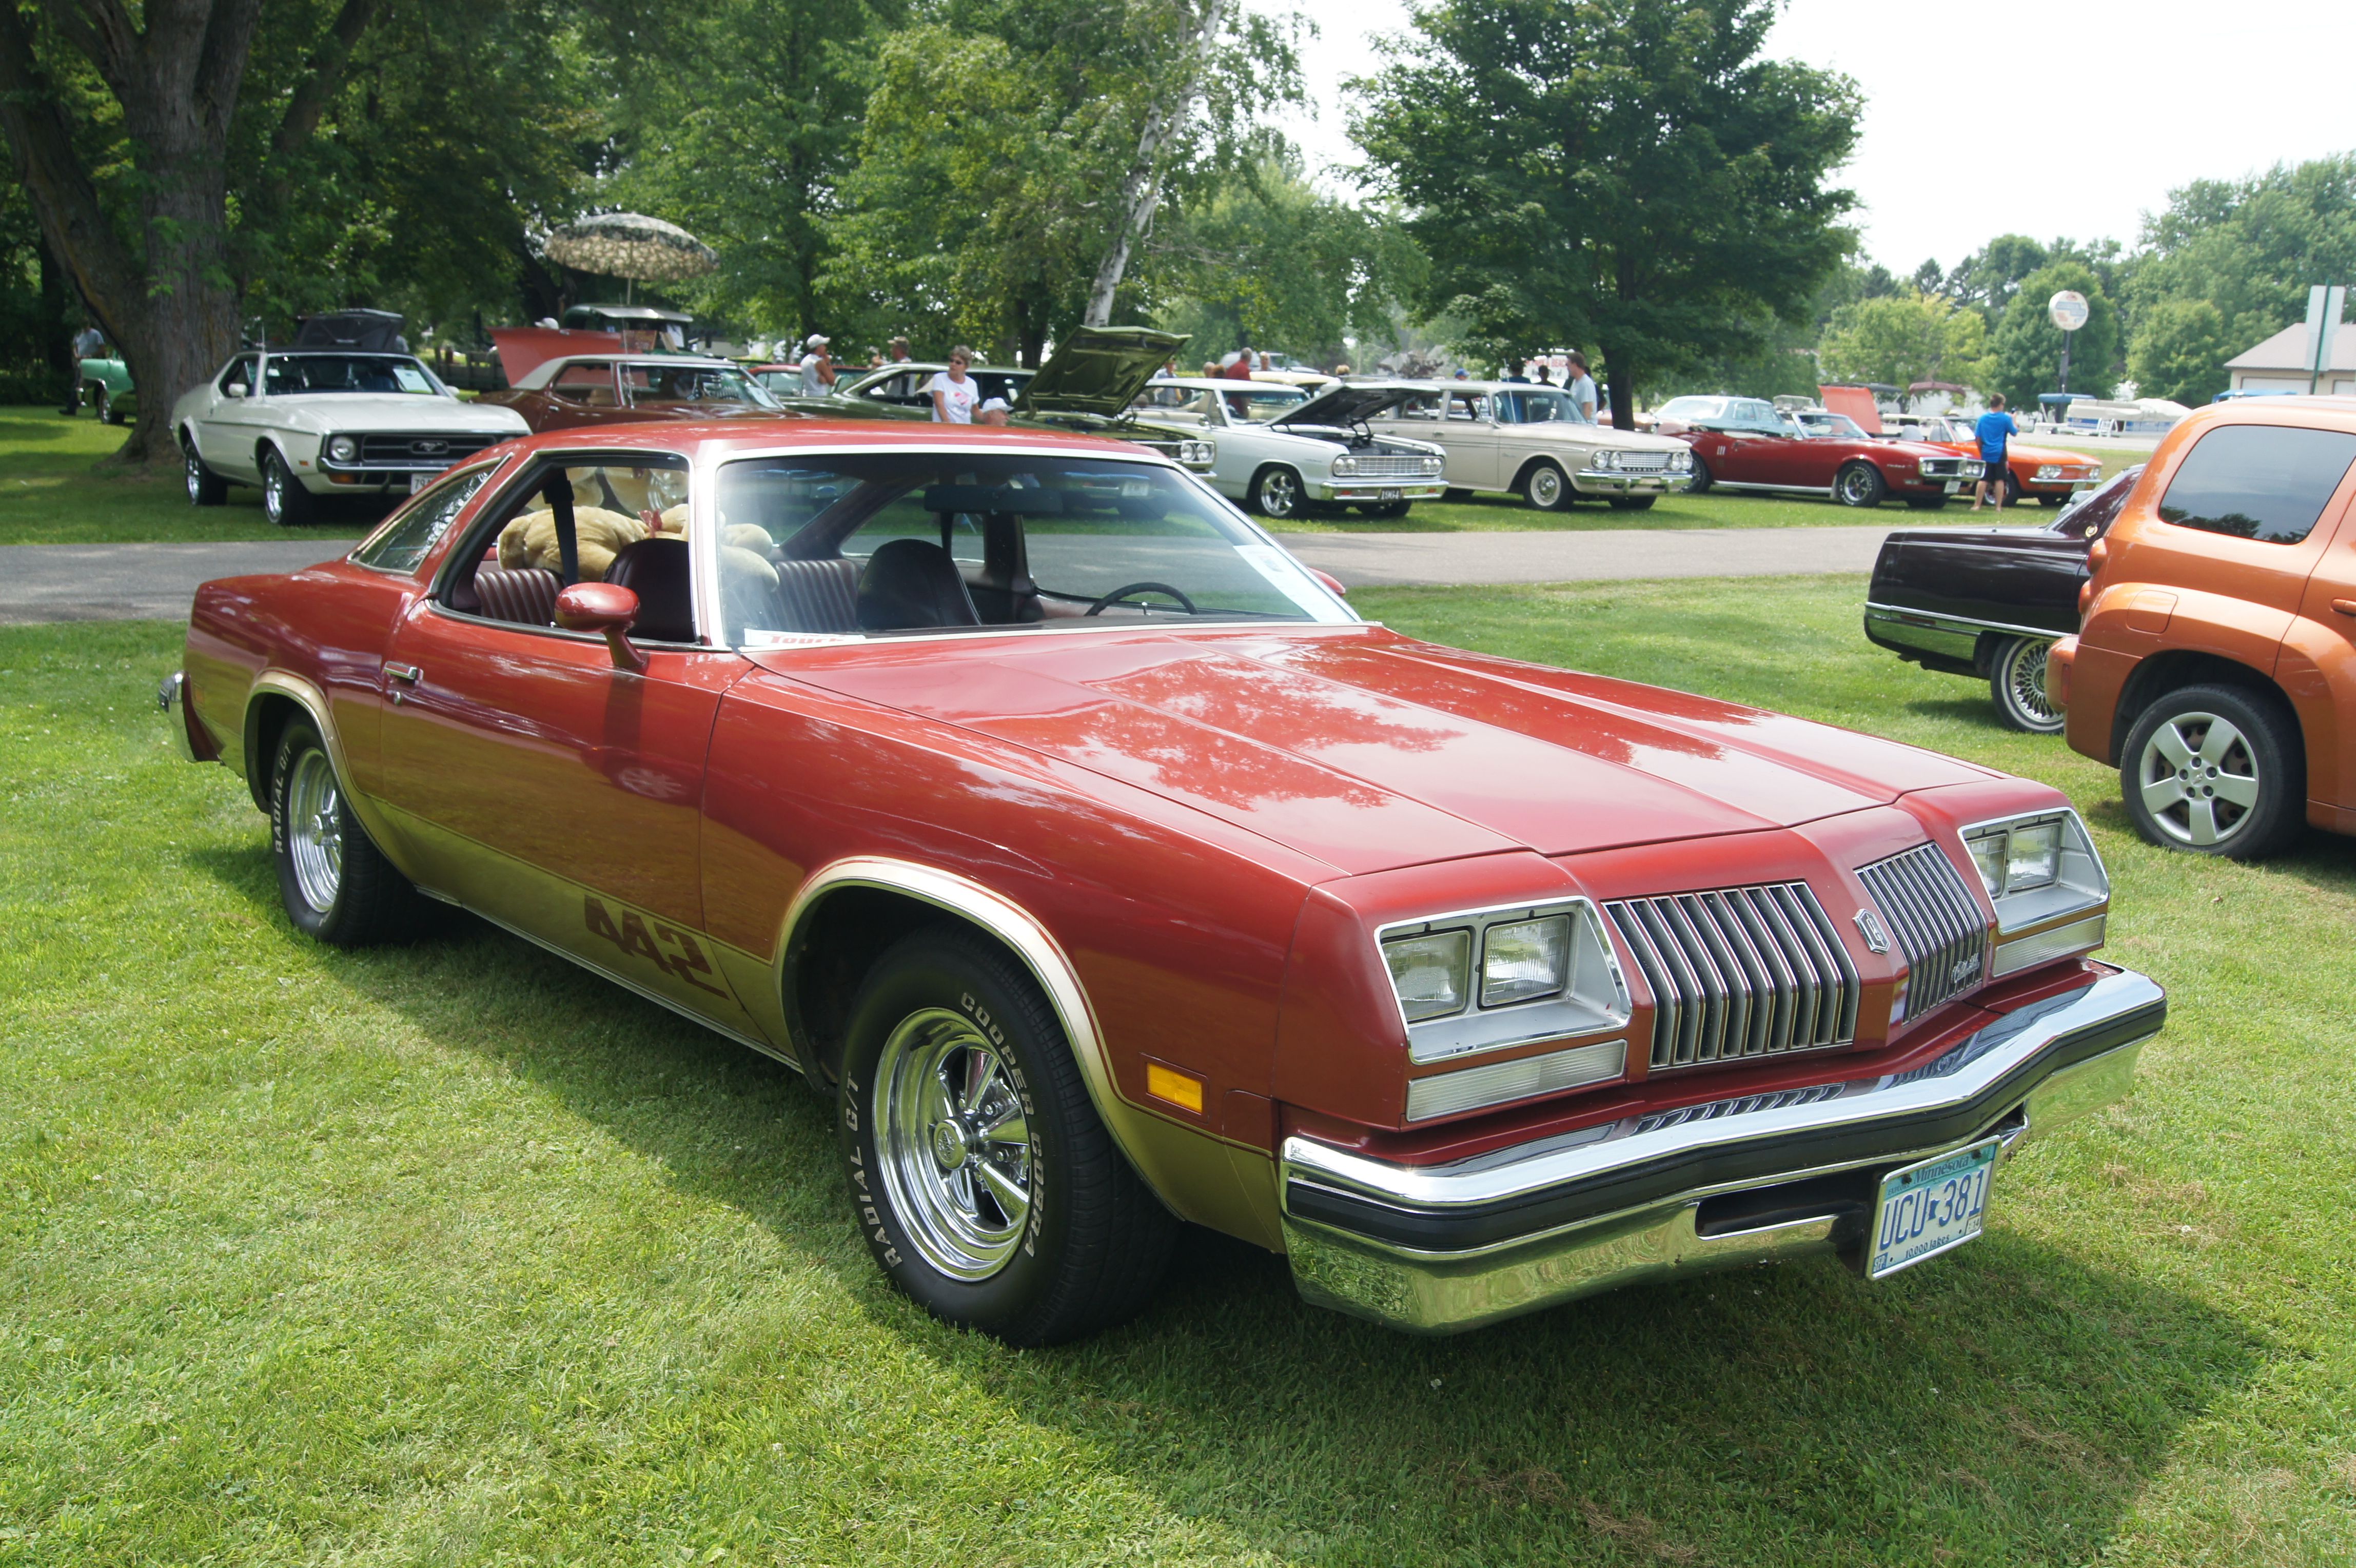 A parked 1976 Olds 442